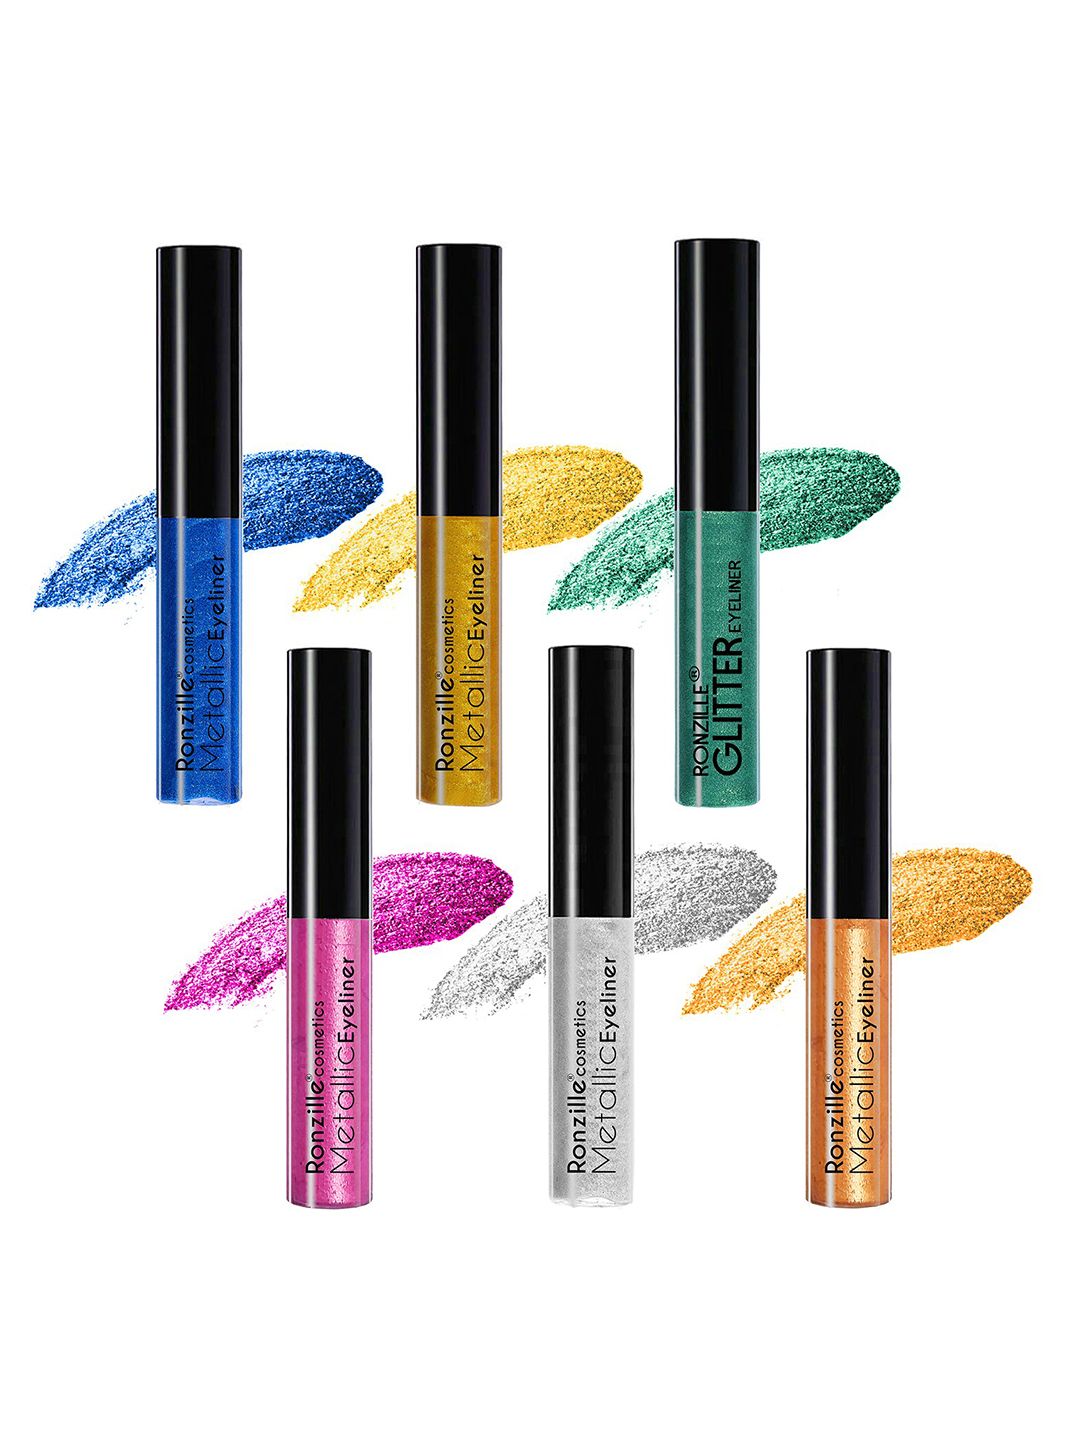 Ronzille Pack Of 6 Glitter Eyeliners Price in India